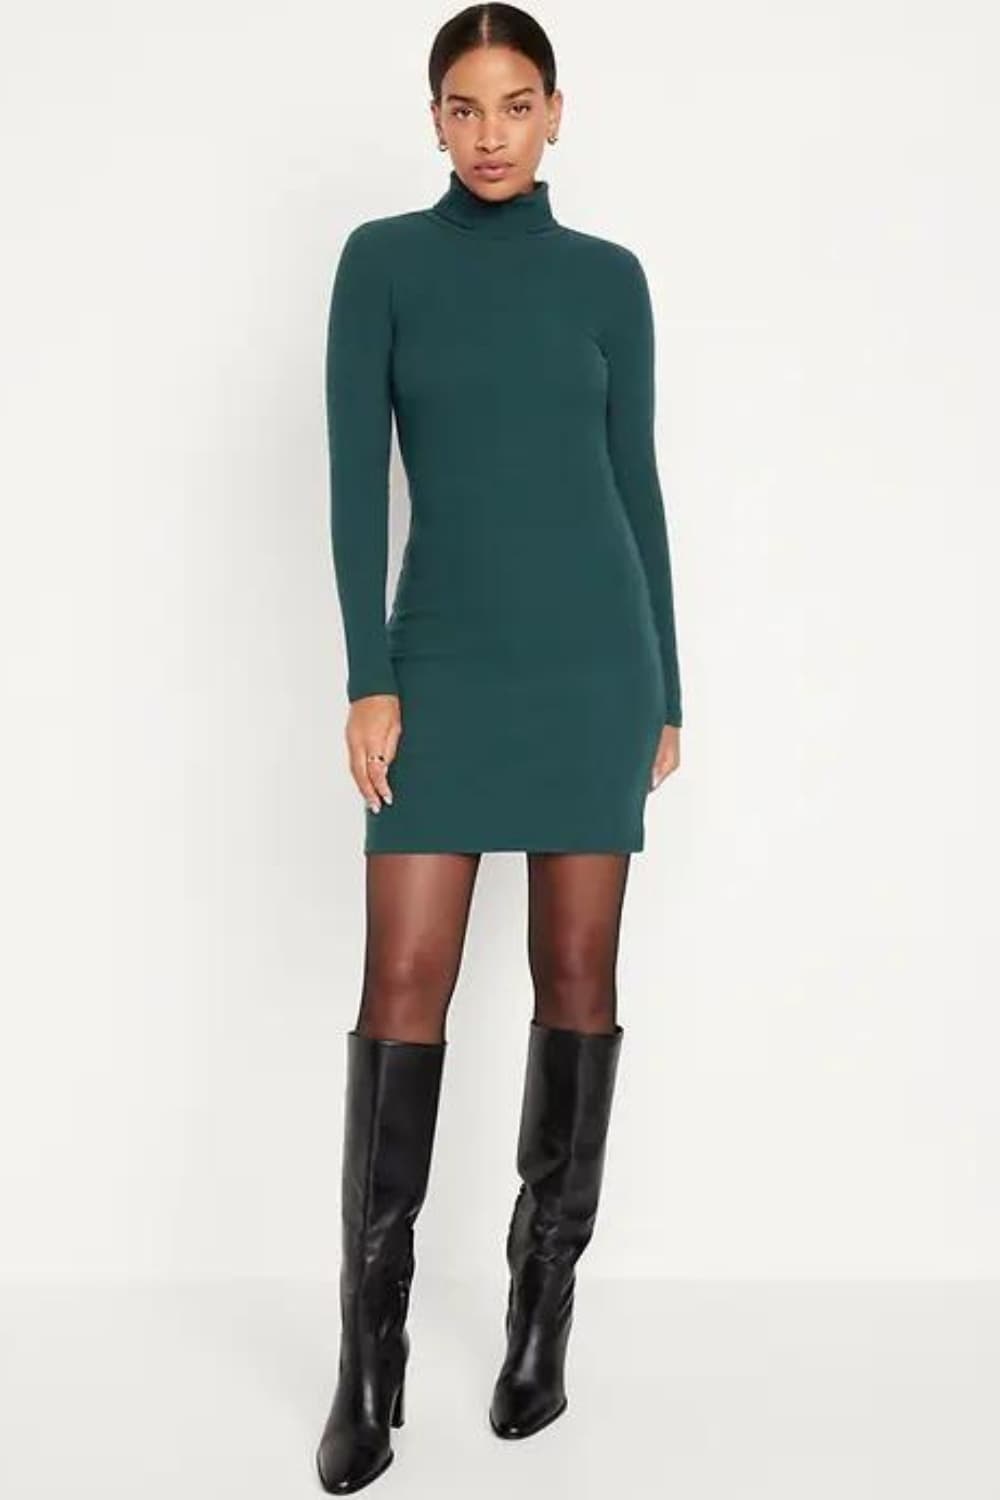 Sheer tights with sweater dress